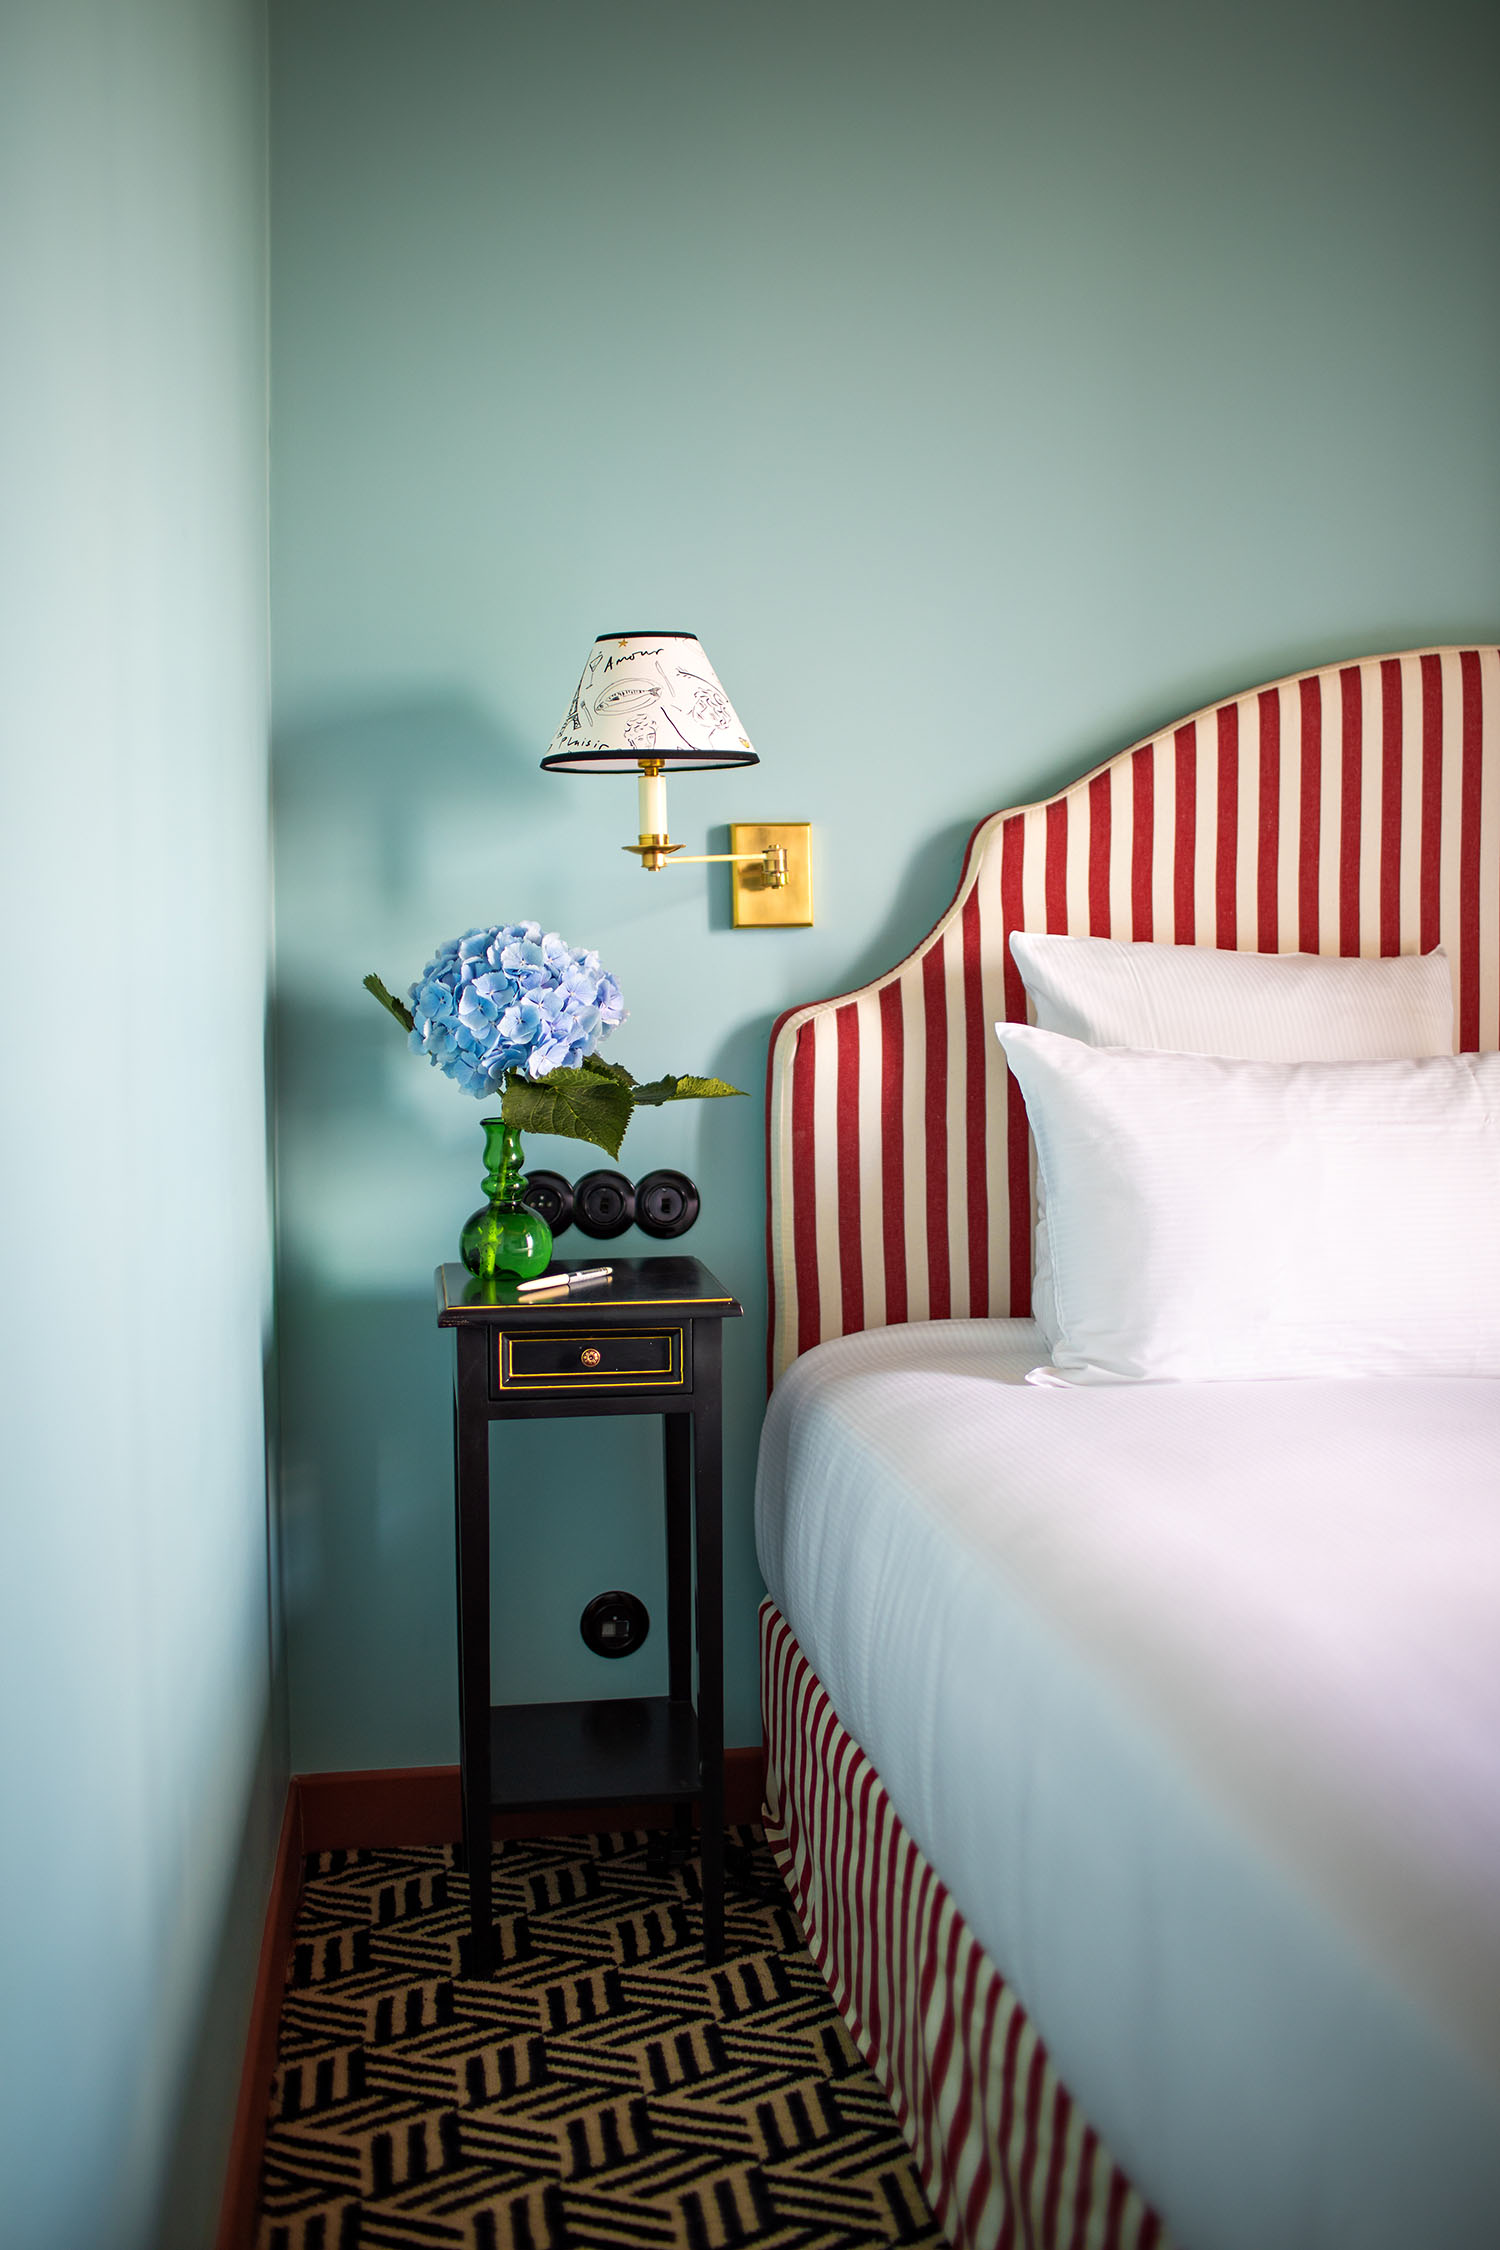 An ice blue guest room at Hotel les Deux Gares with a red + white striped headboard, geometric patterned carpeting, amural-sketched wall lamp shades, and a small column-shaped side table in a glossy mahogany wood